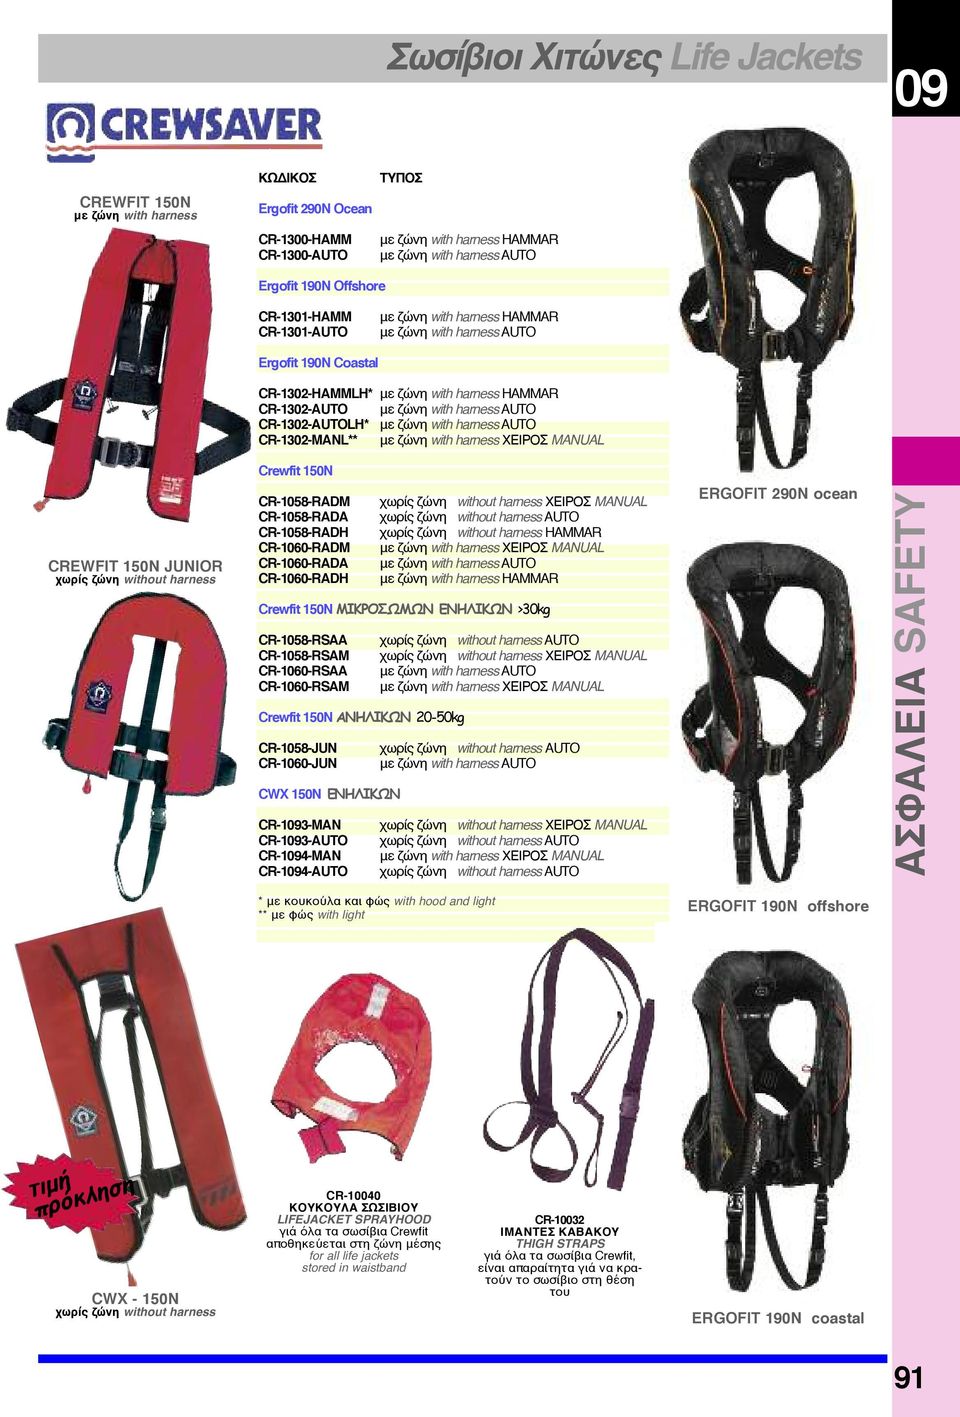 CR-1302-AUTOLH* με ζώνη with harness AUTO CR-1302-MANL** με ζώνη with harness ΧΕΙΡΟΣ MANUAL Crewfit 150N CREWFIT 150N JUNIOR χωρίς ζώνη without harness CR-1058-RADM χωρίς ζώνη without harness ΧΕΙΡΟΣ